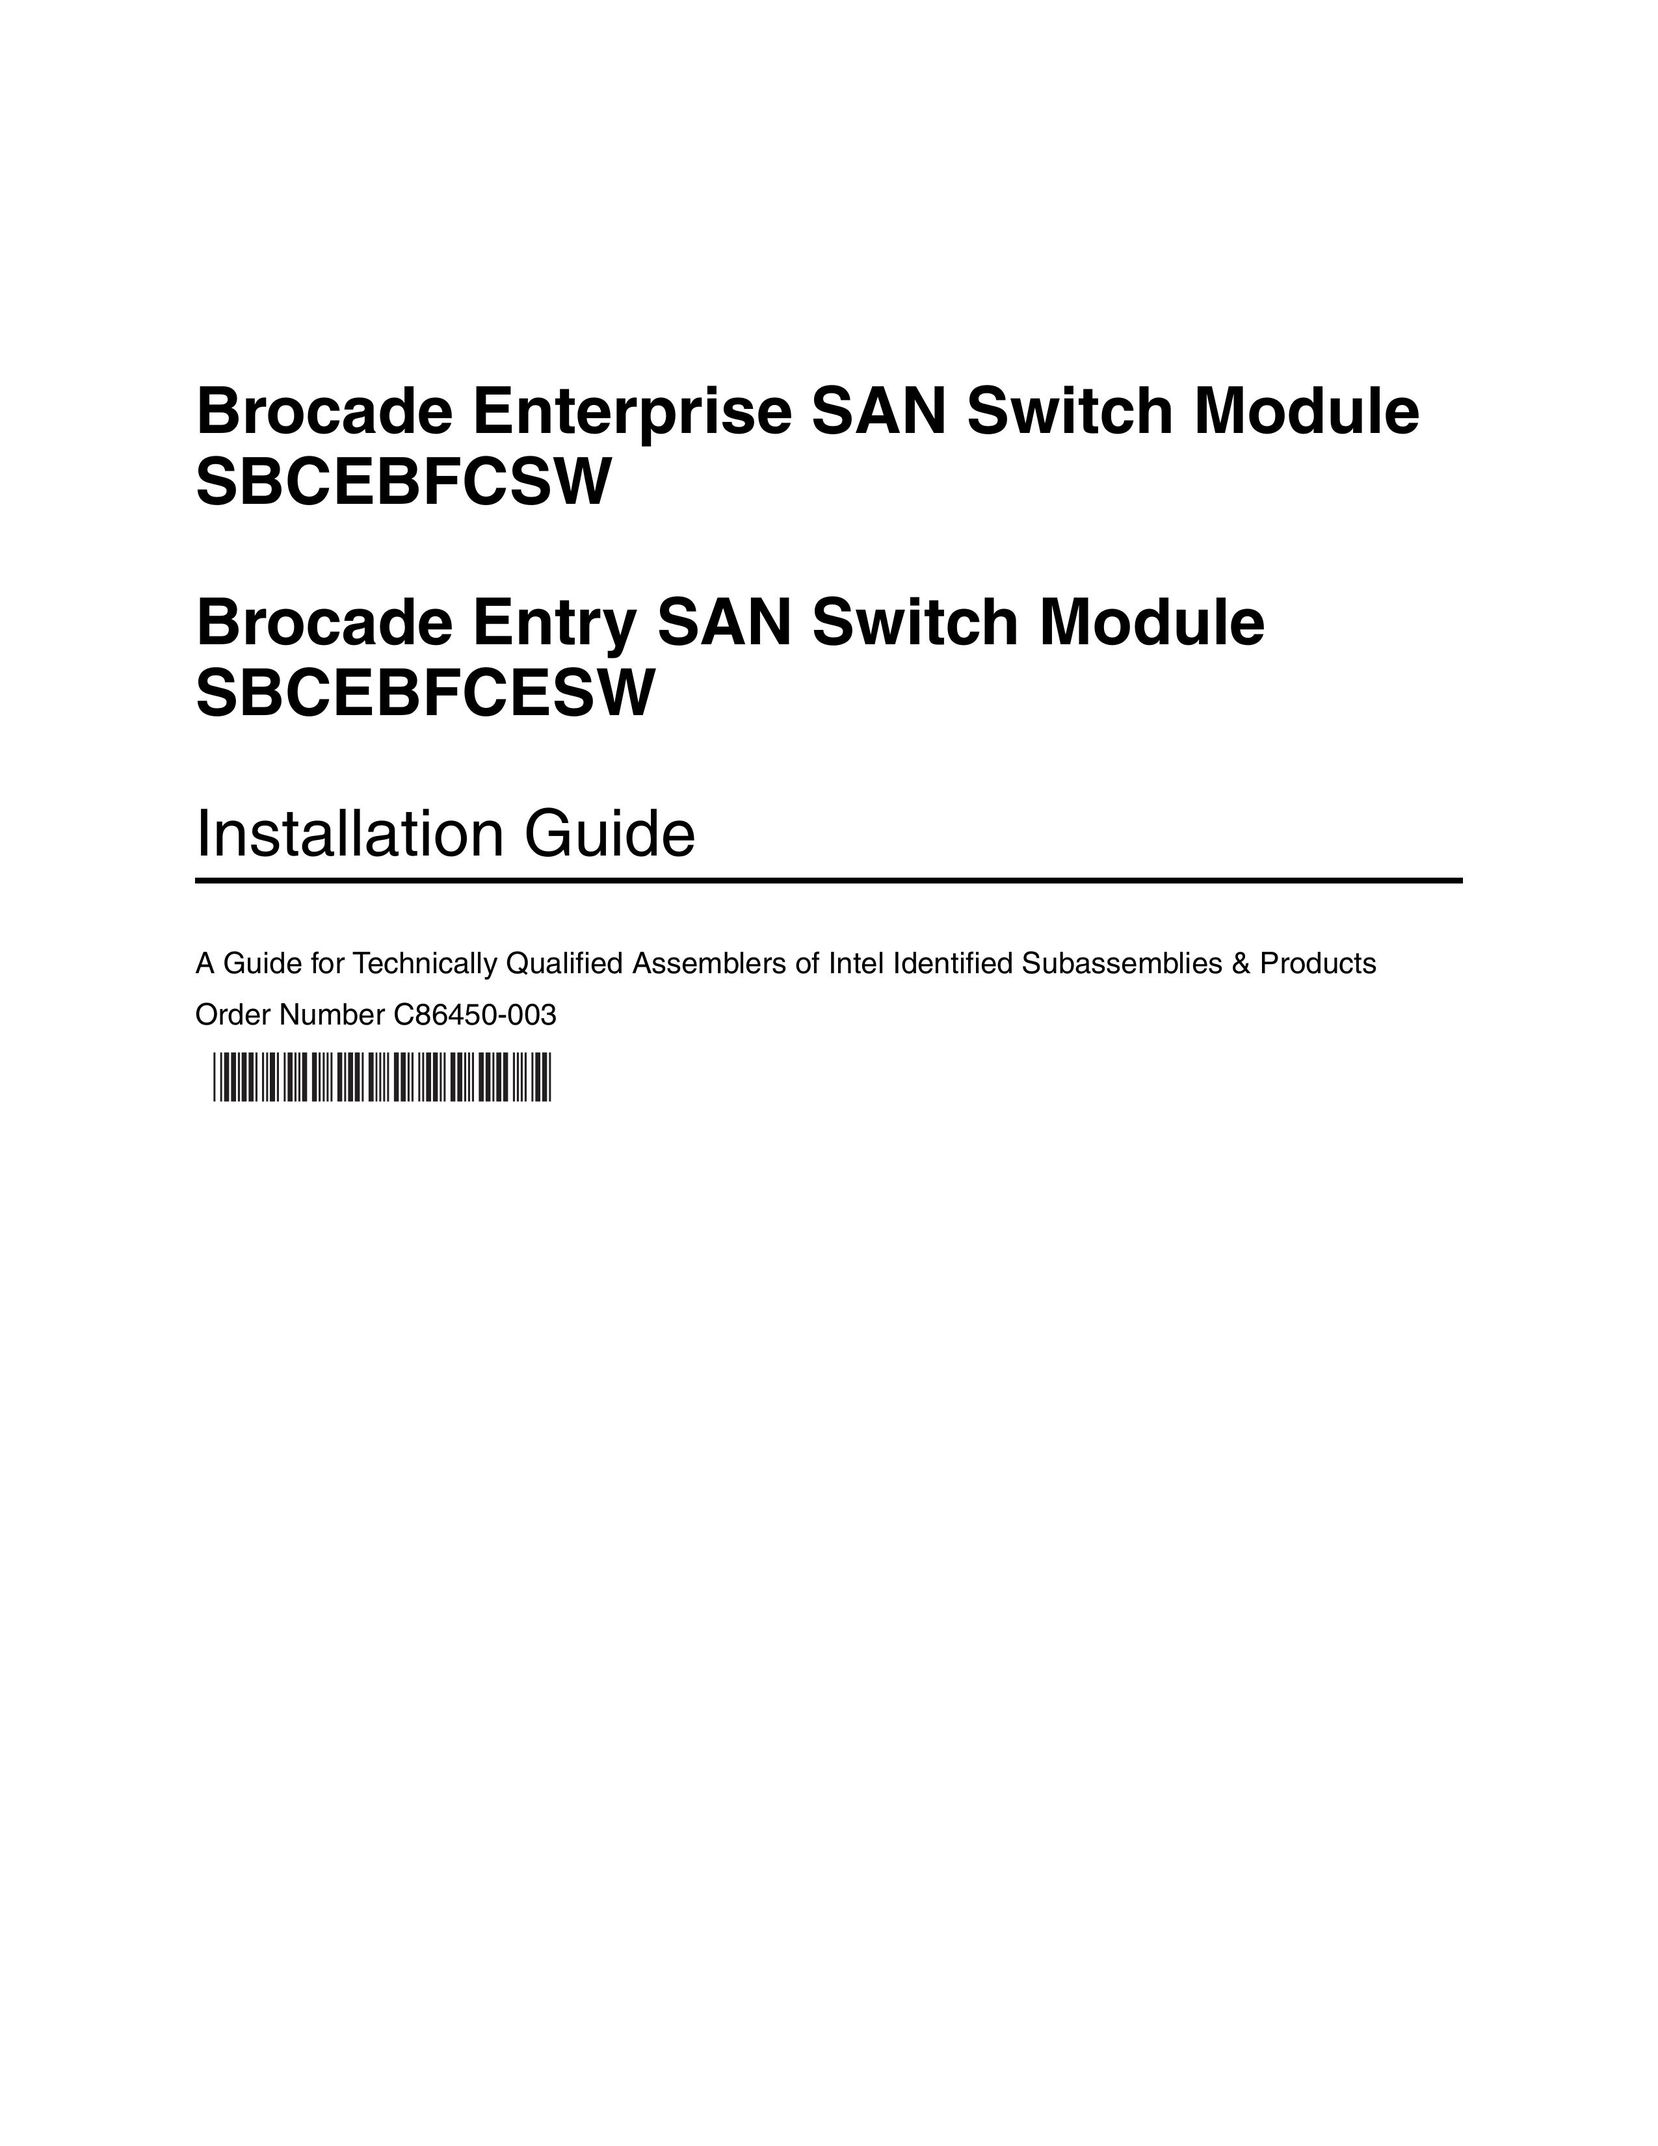 Brocade Communications Systems SBCEBFCSW Vacuum Cleaner User Manual